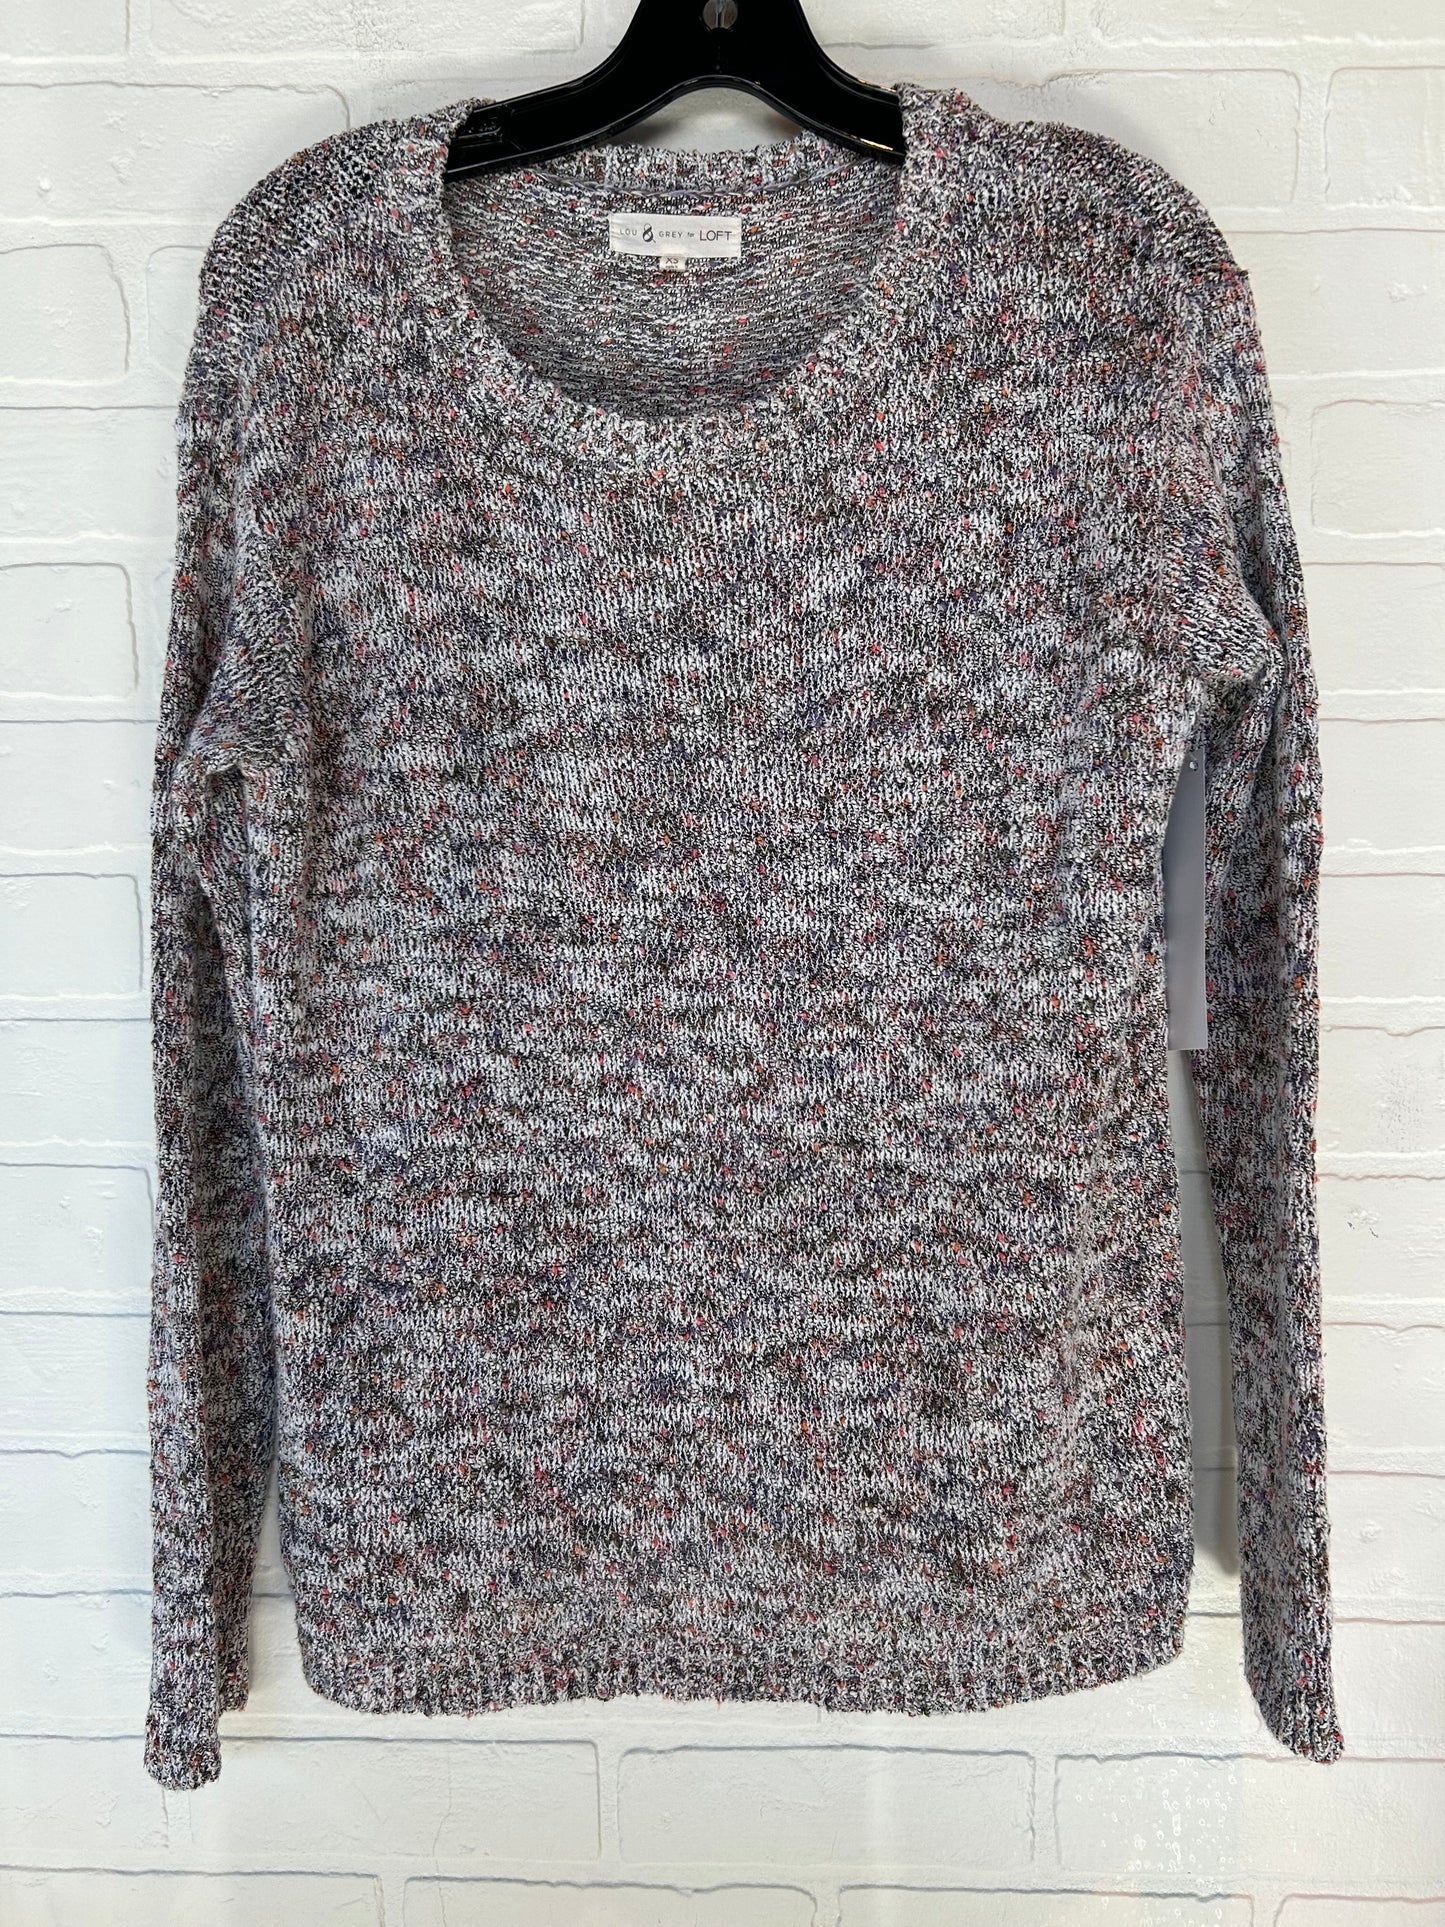 Multi-colored Sweater Lou And Grey, Size Xs